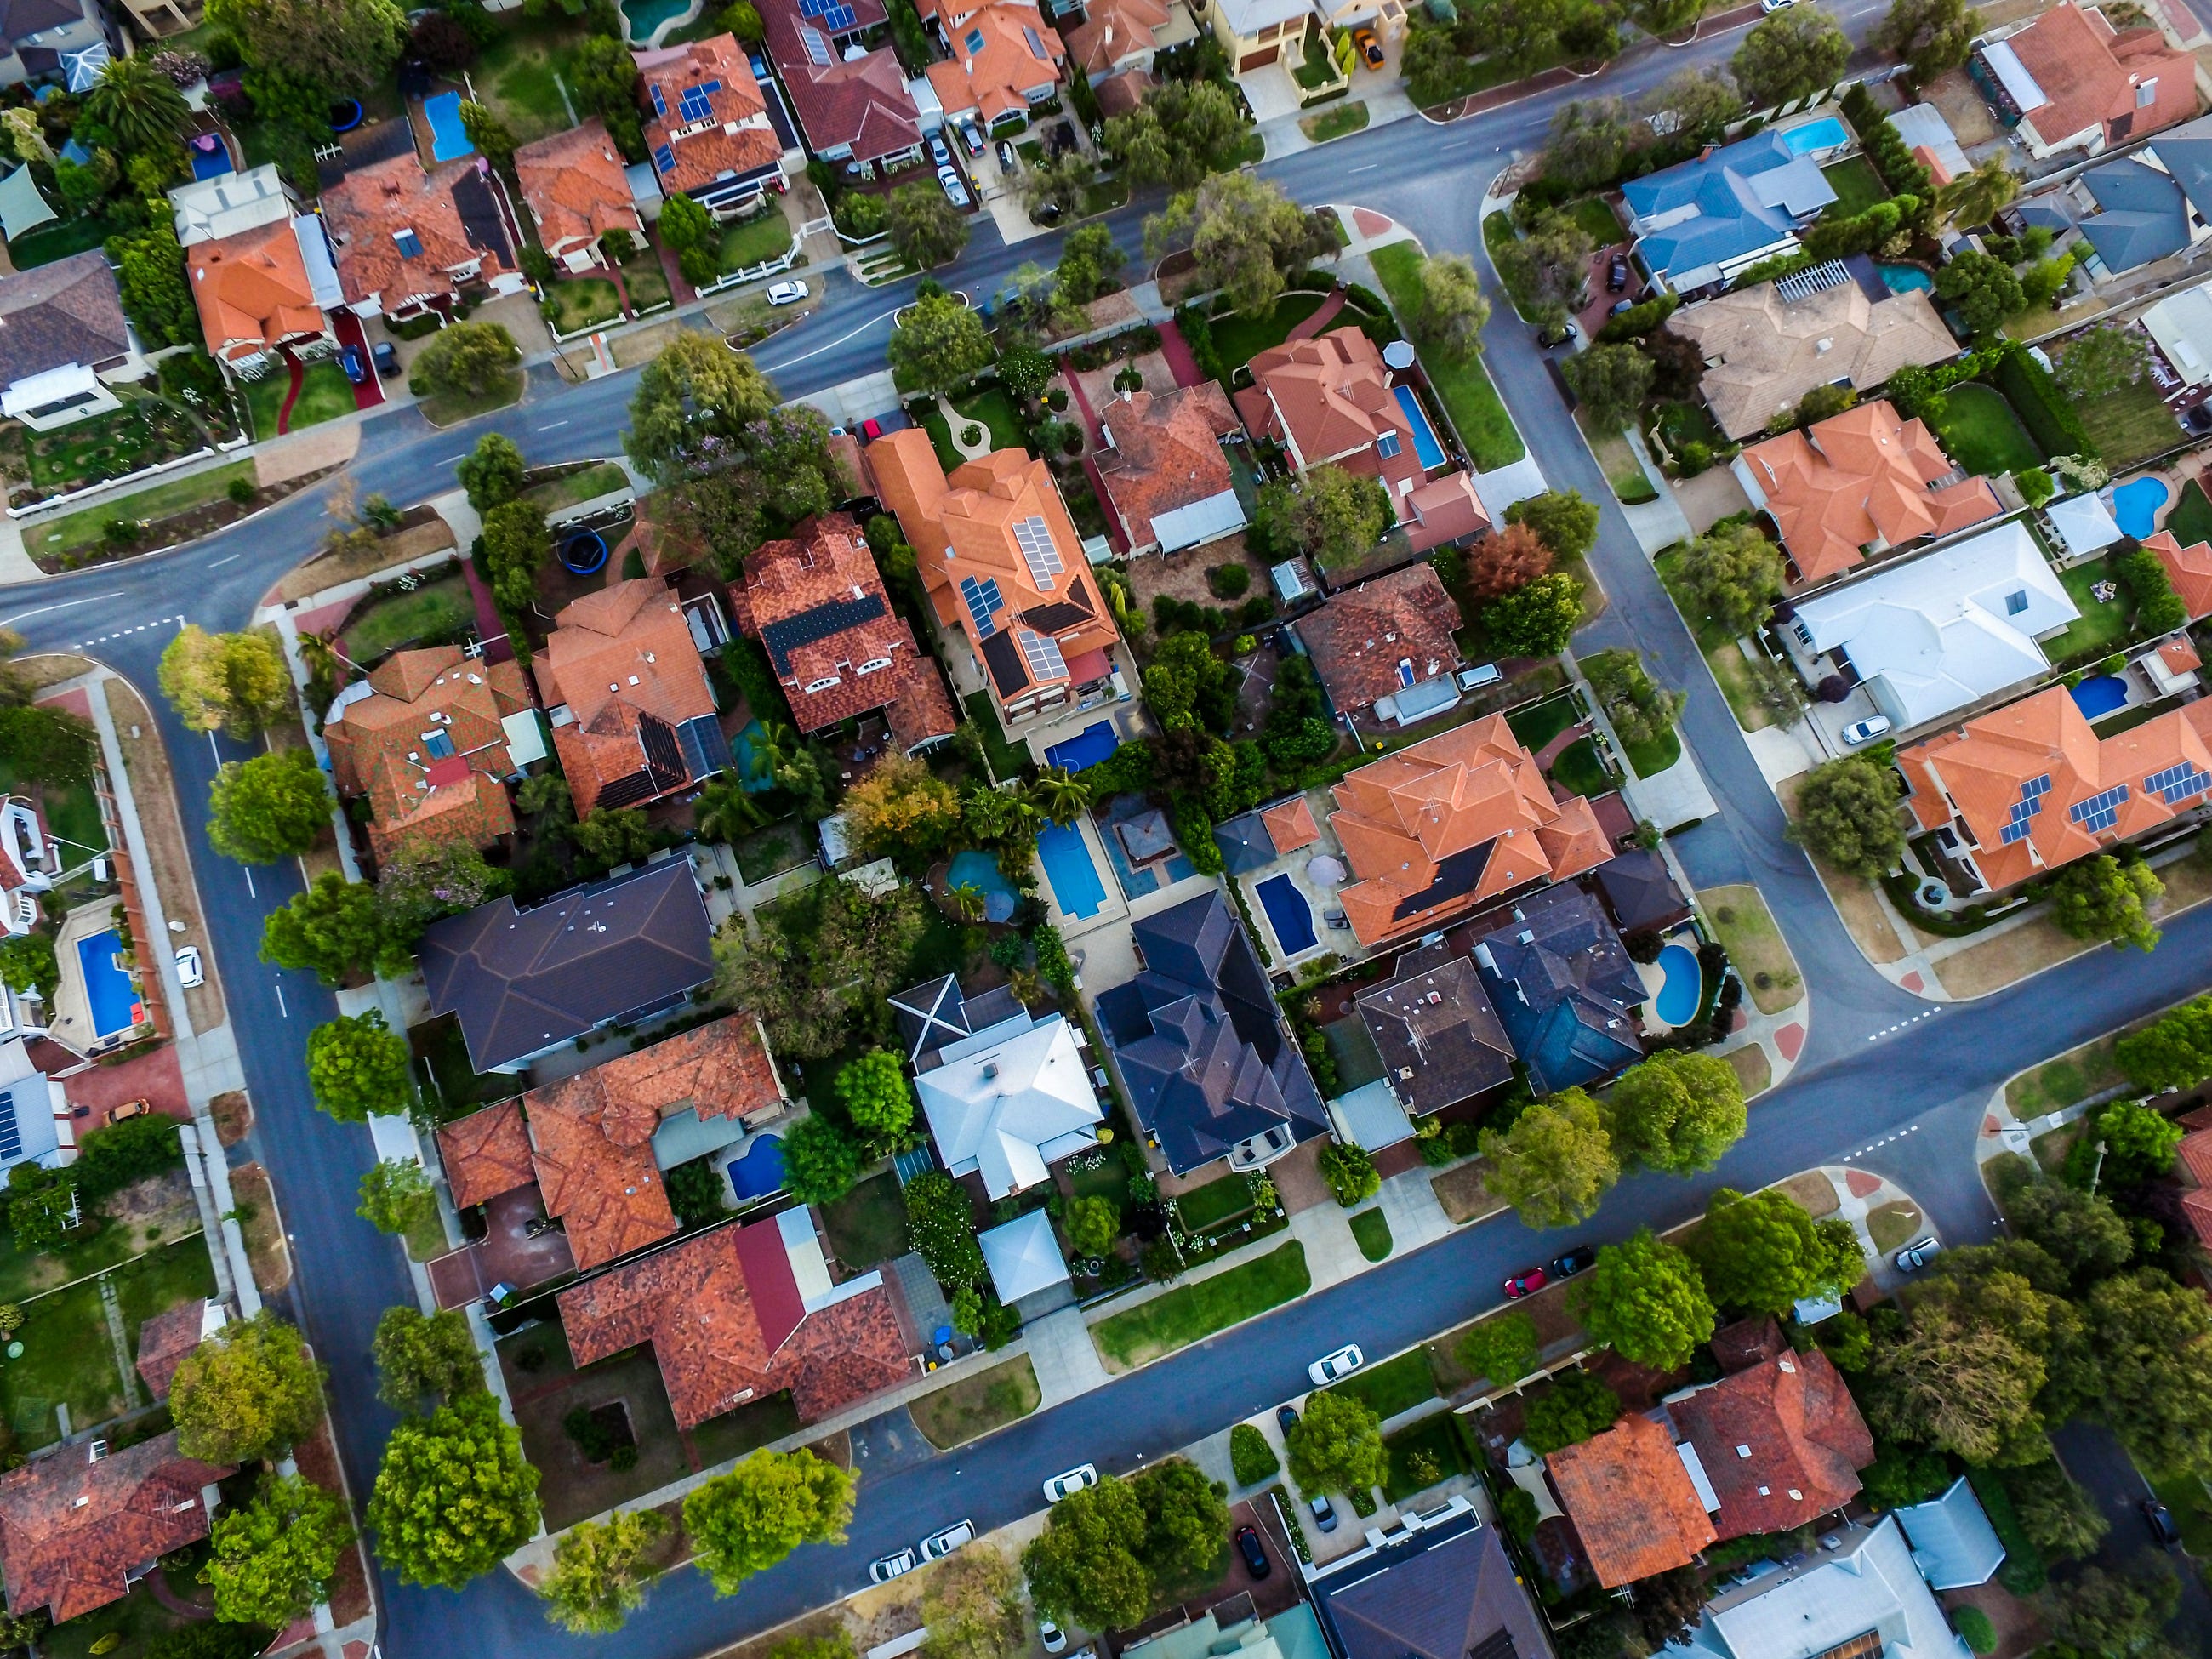 Report: Home prices have grown 2x faster than income since 2000